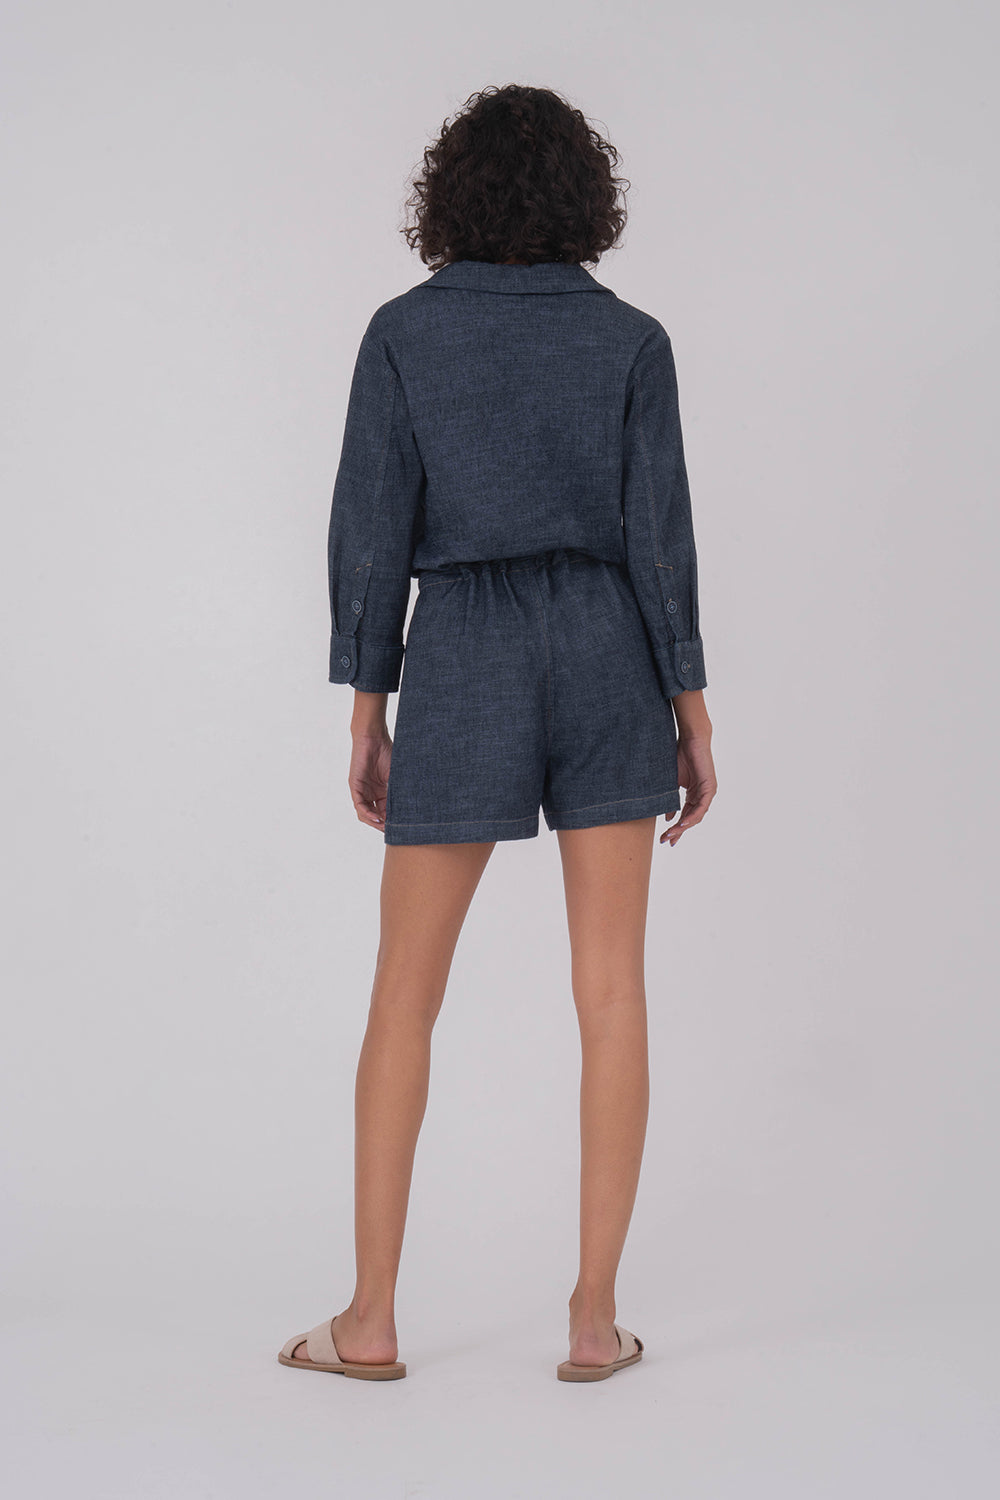 Denim by Nature™ Milly Romper